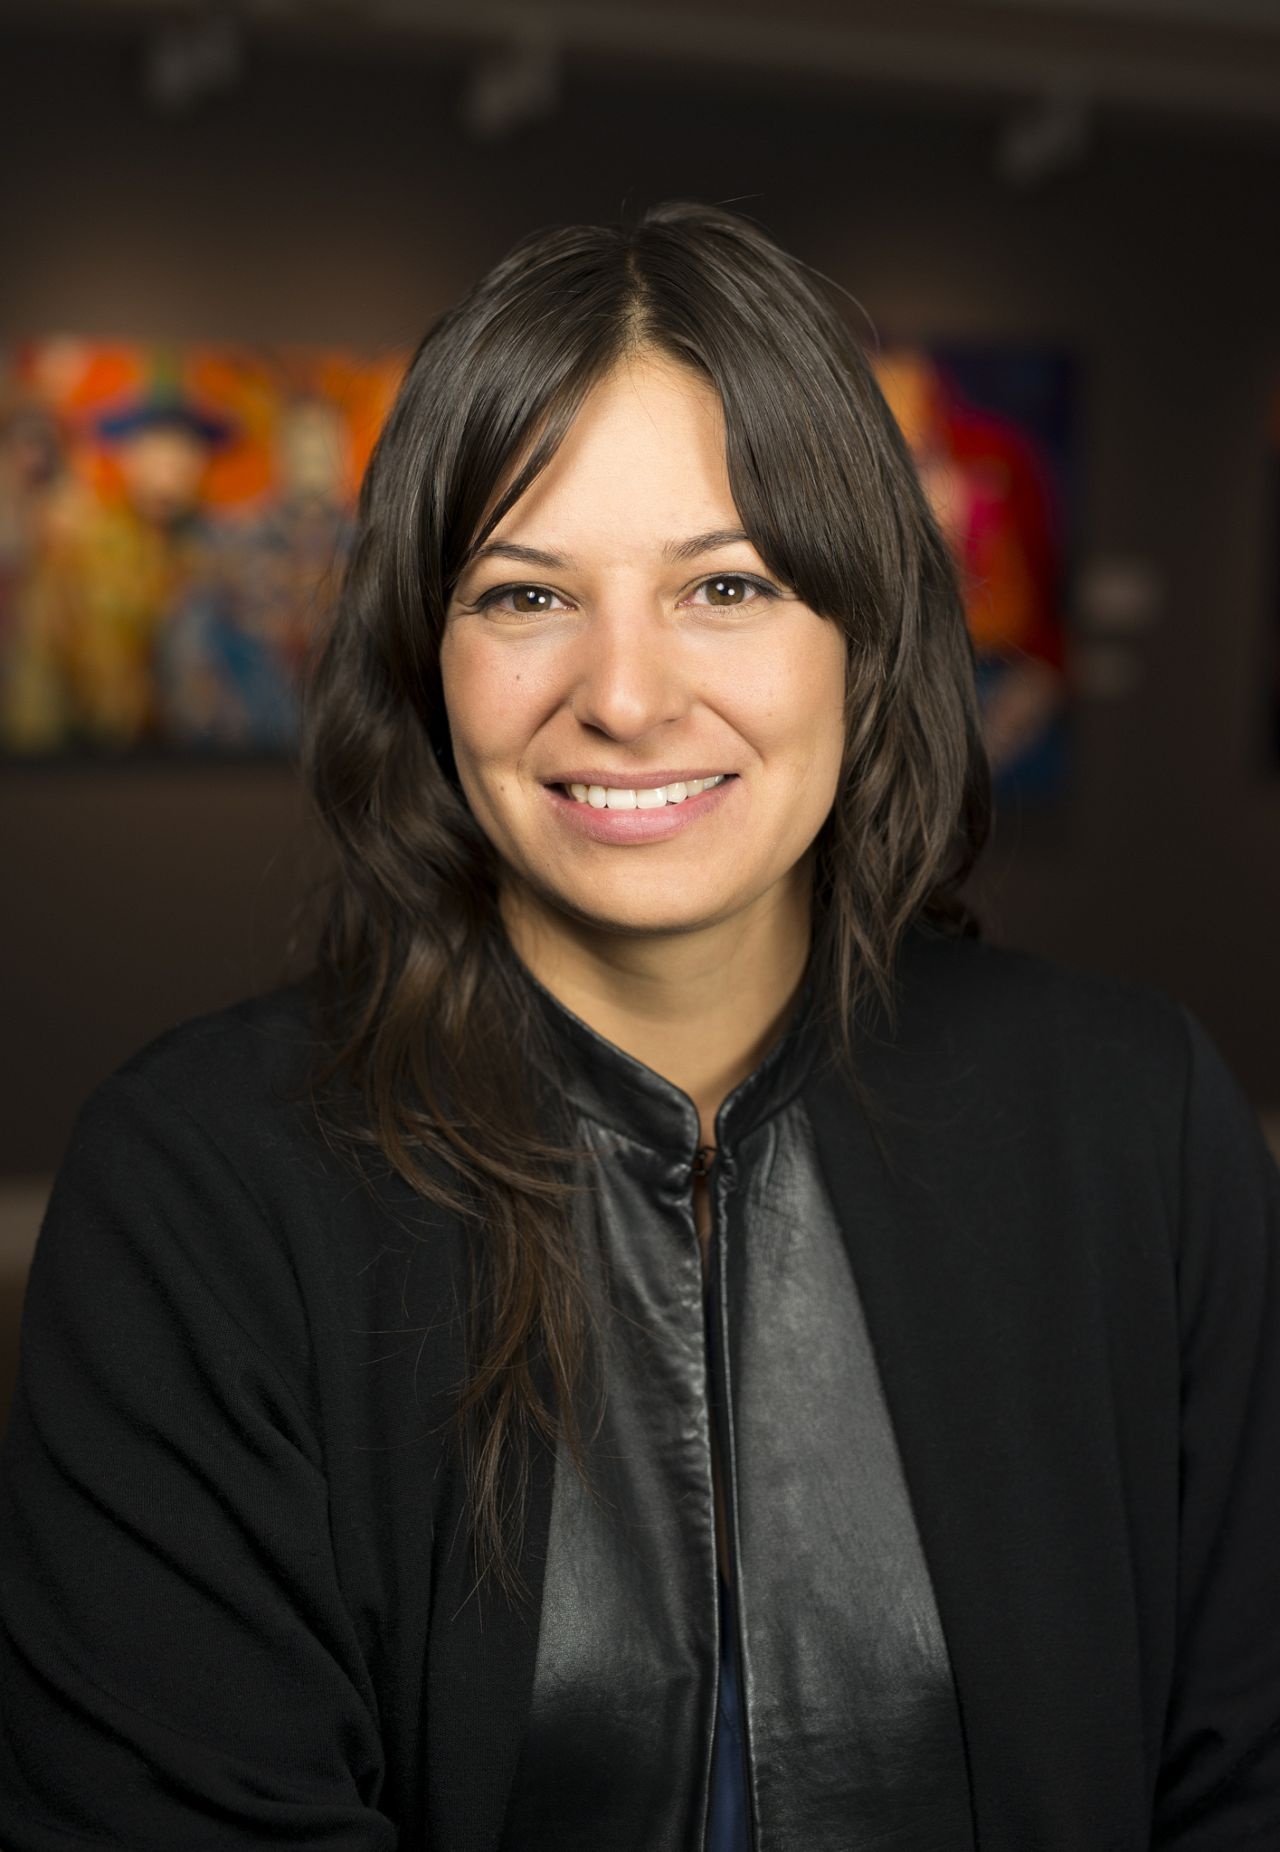 A portrait of Candice Hopkinss, a citizen of Carcross/Tagish First Nation. She has dark brown hair parted at the center of her forehead that falls below her shoulders. She wears a black jacket with a wide lapel that has the texture of leather. She smiles with a blurry artwork behind her in the background. 